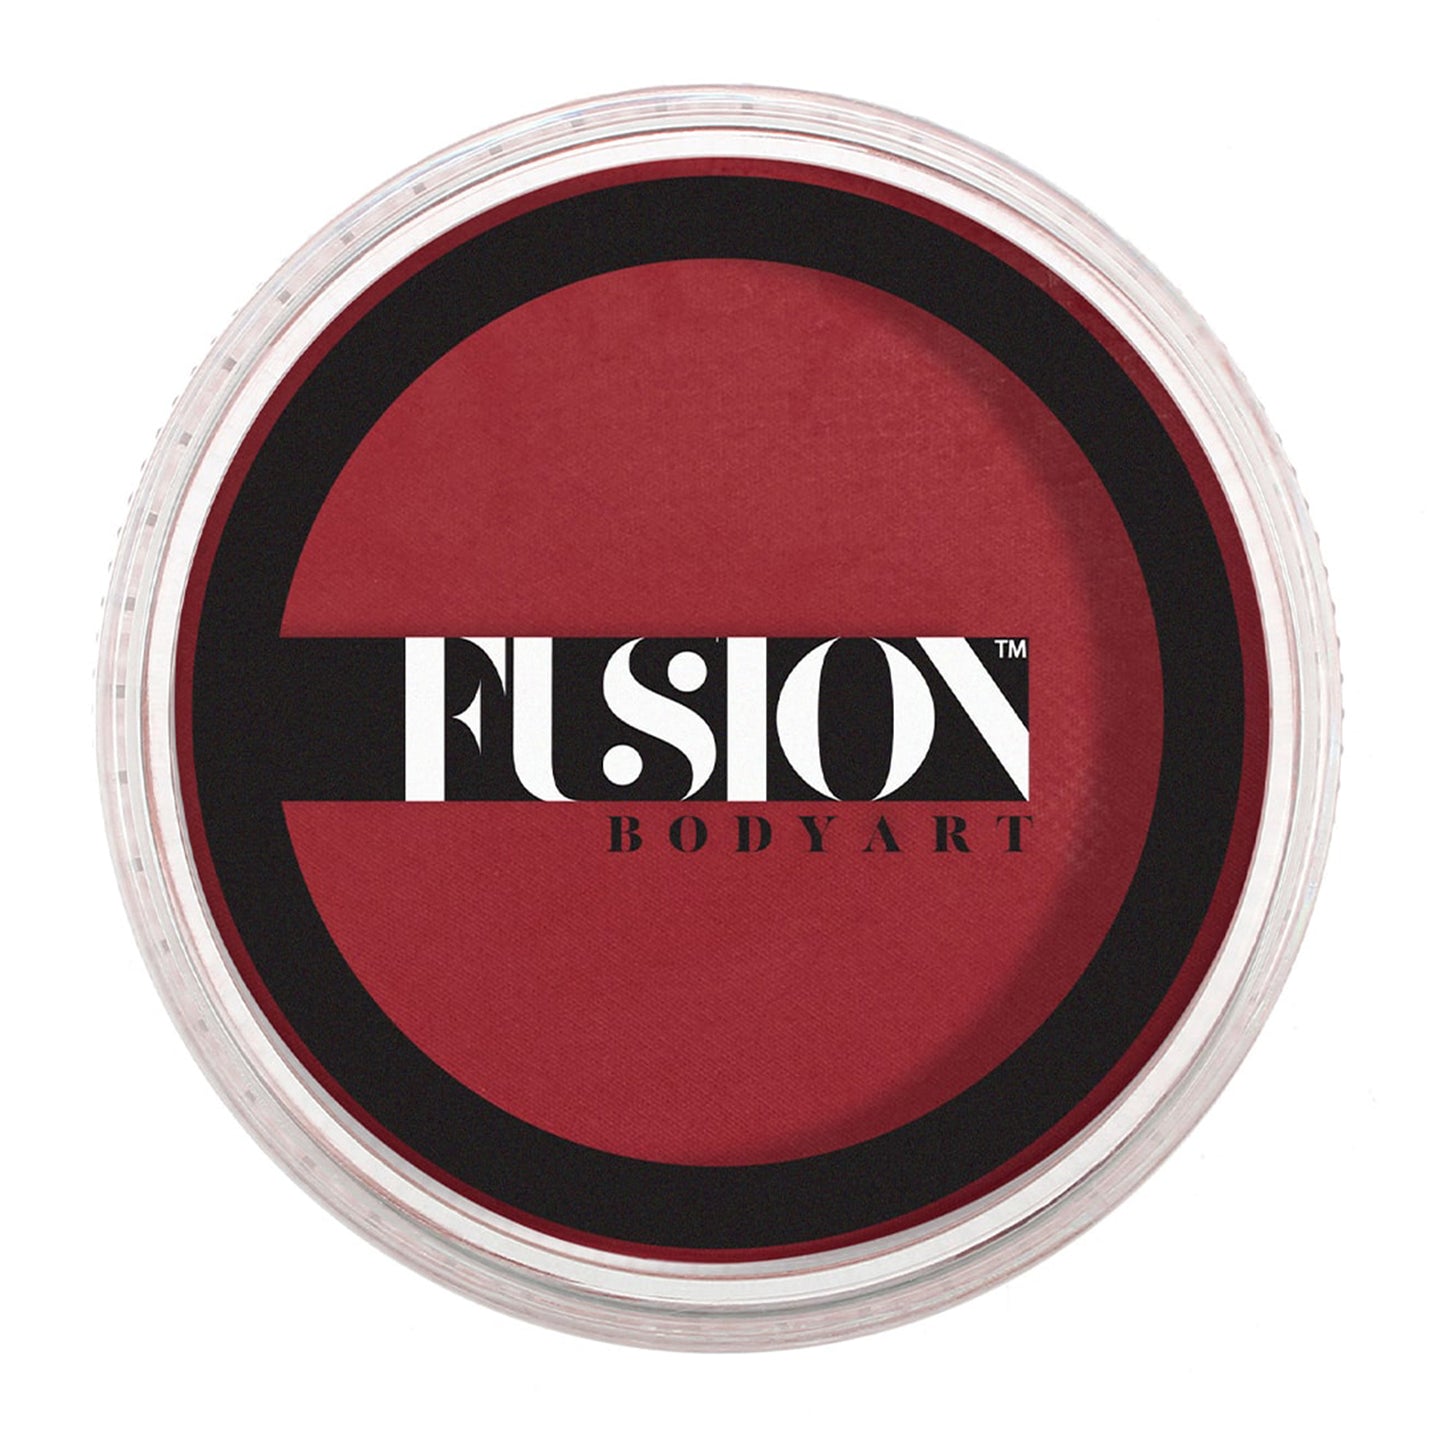 Fusion Body Art Face & Body Paint - Prime Sweet Cherry Red